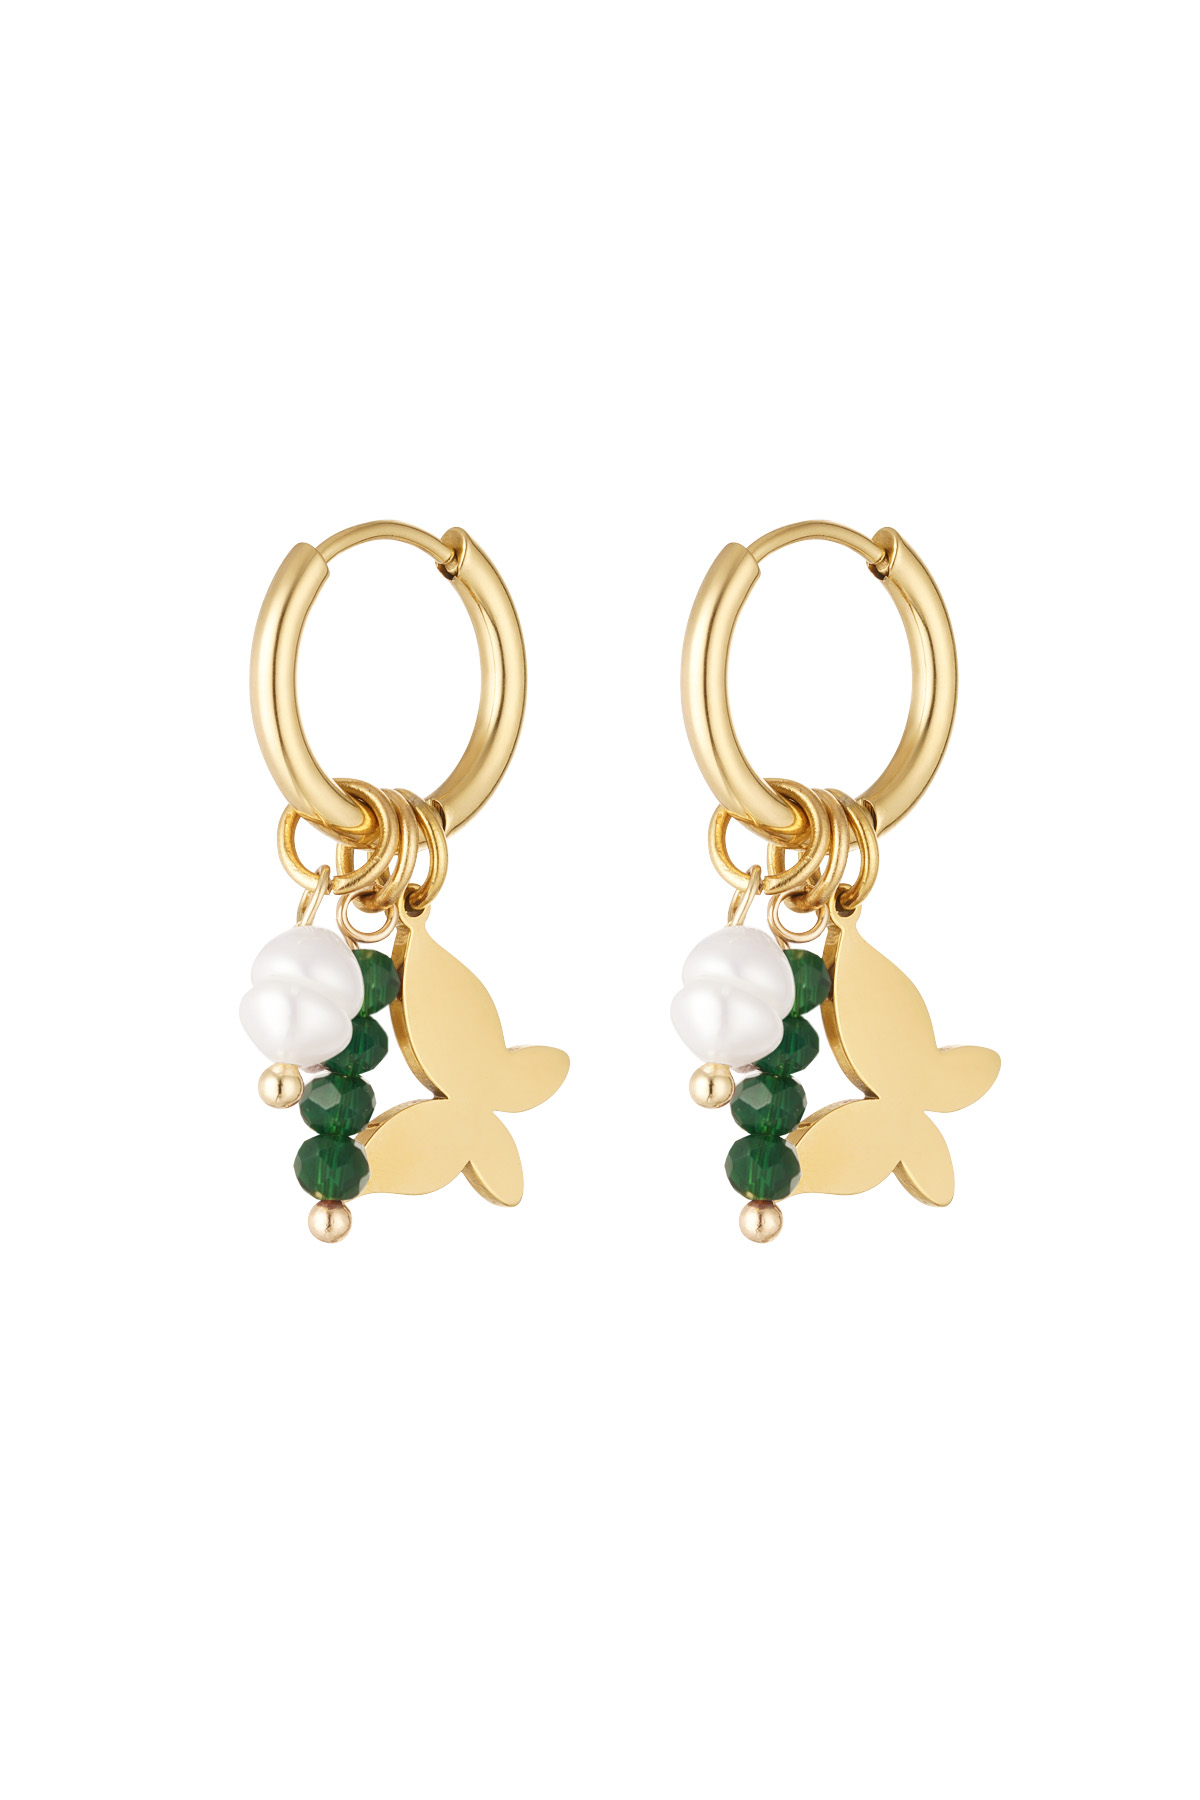 Butterfly earrings with beads - gold/green